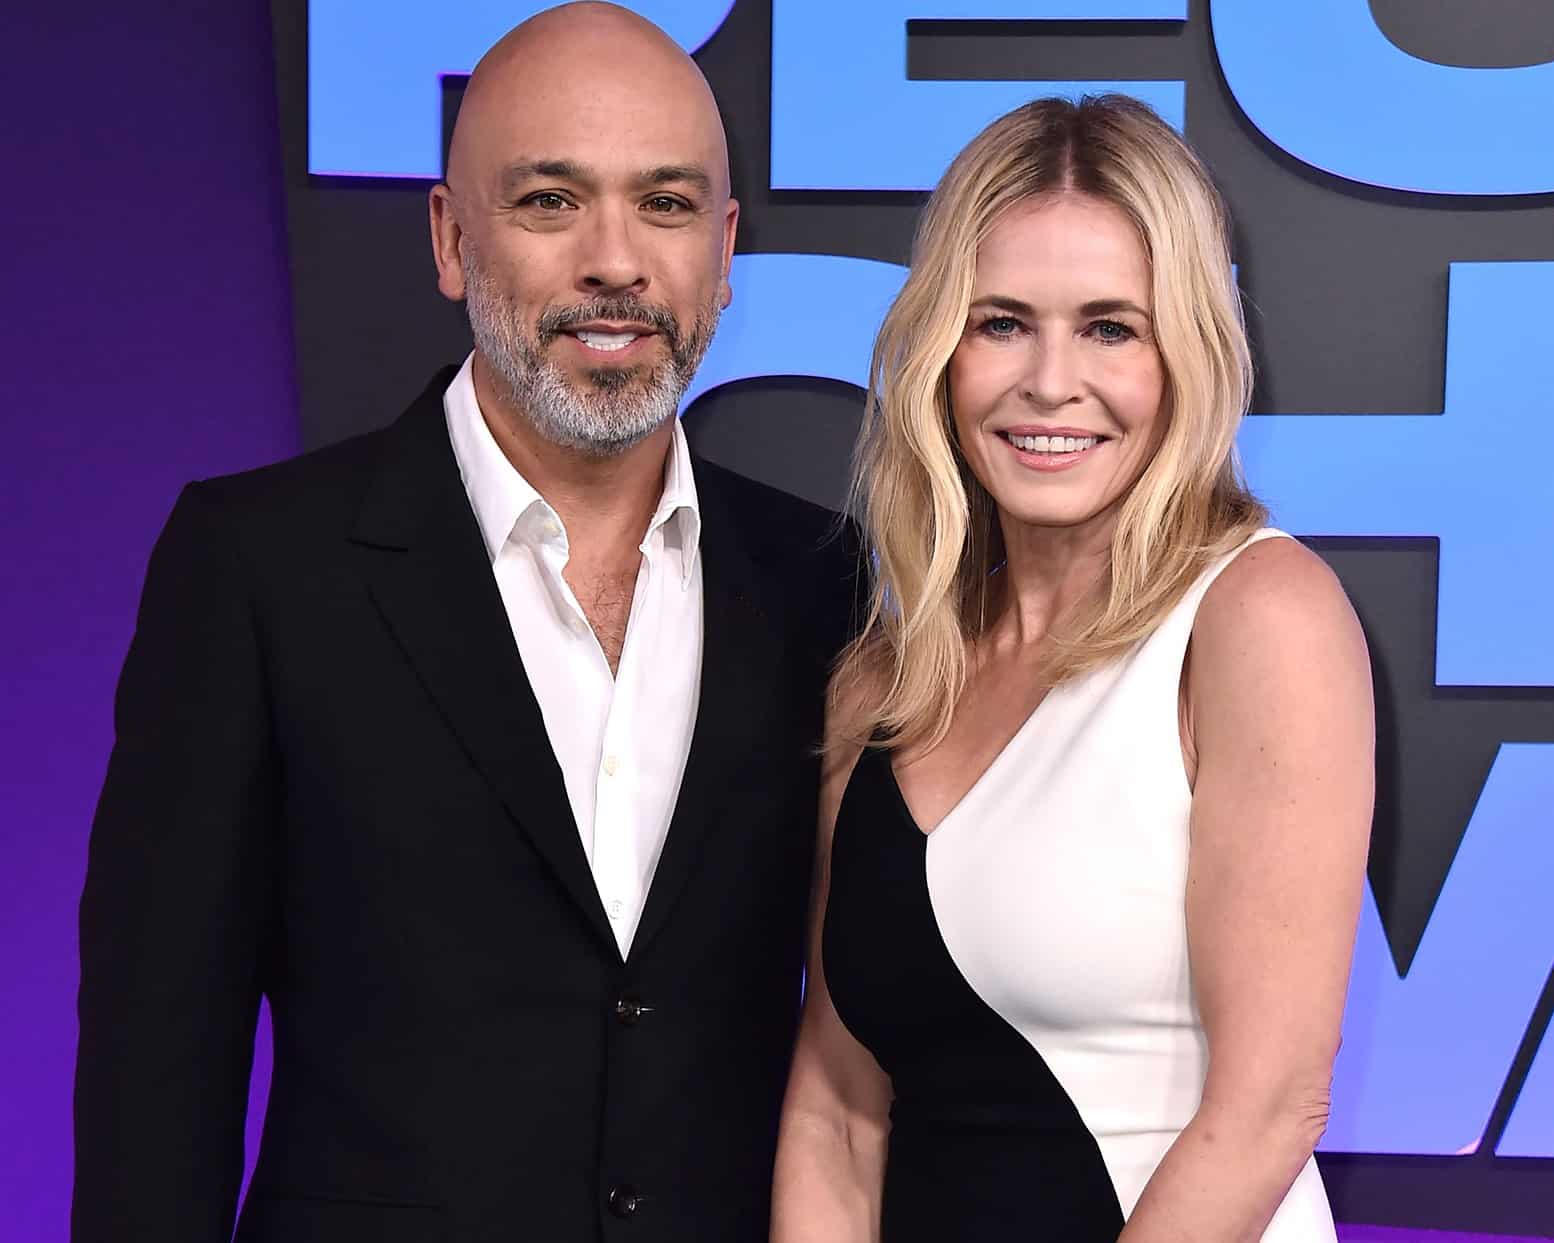 Chelsea Handler and comedian Jo Koy made their relationship official by posting on Instagram On September 27, 2021